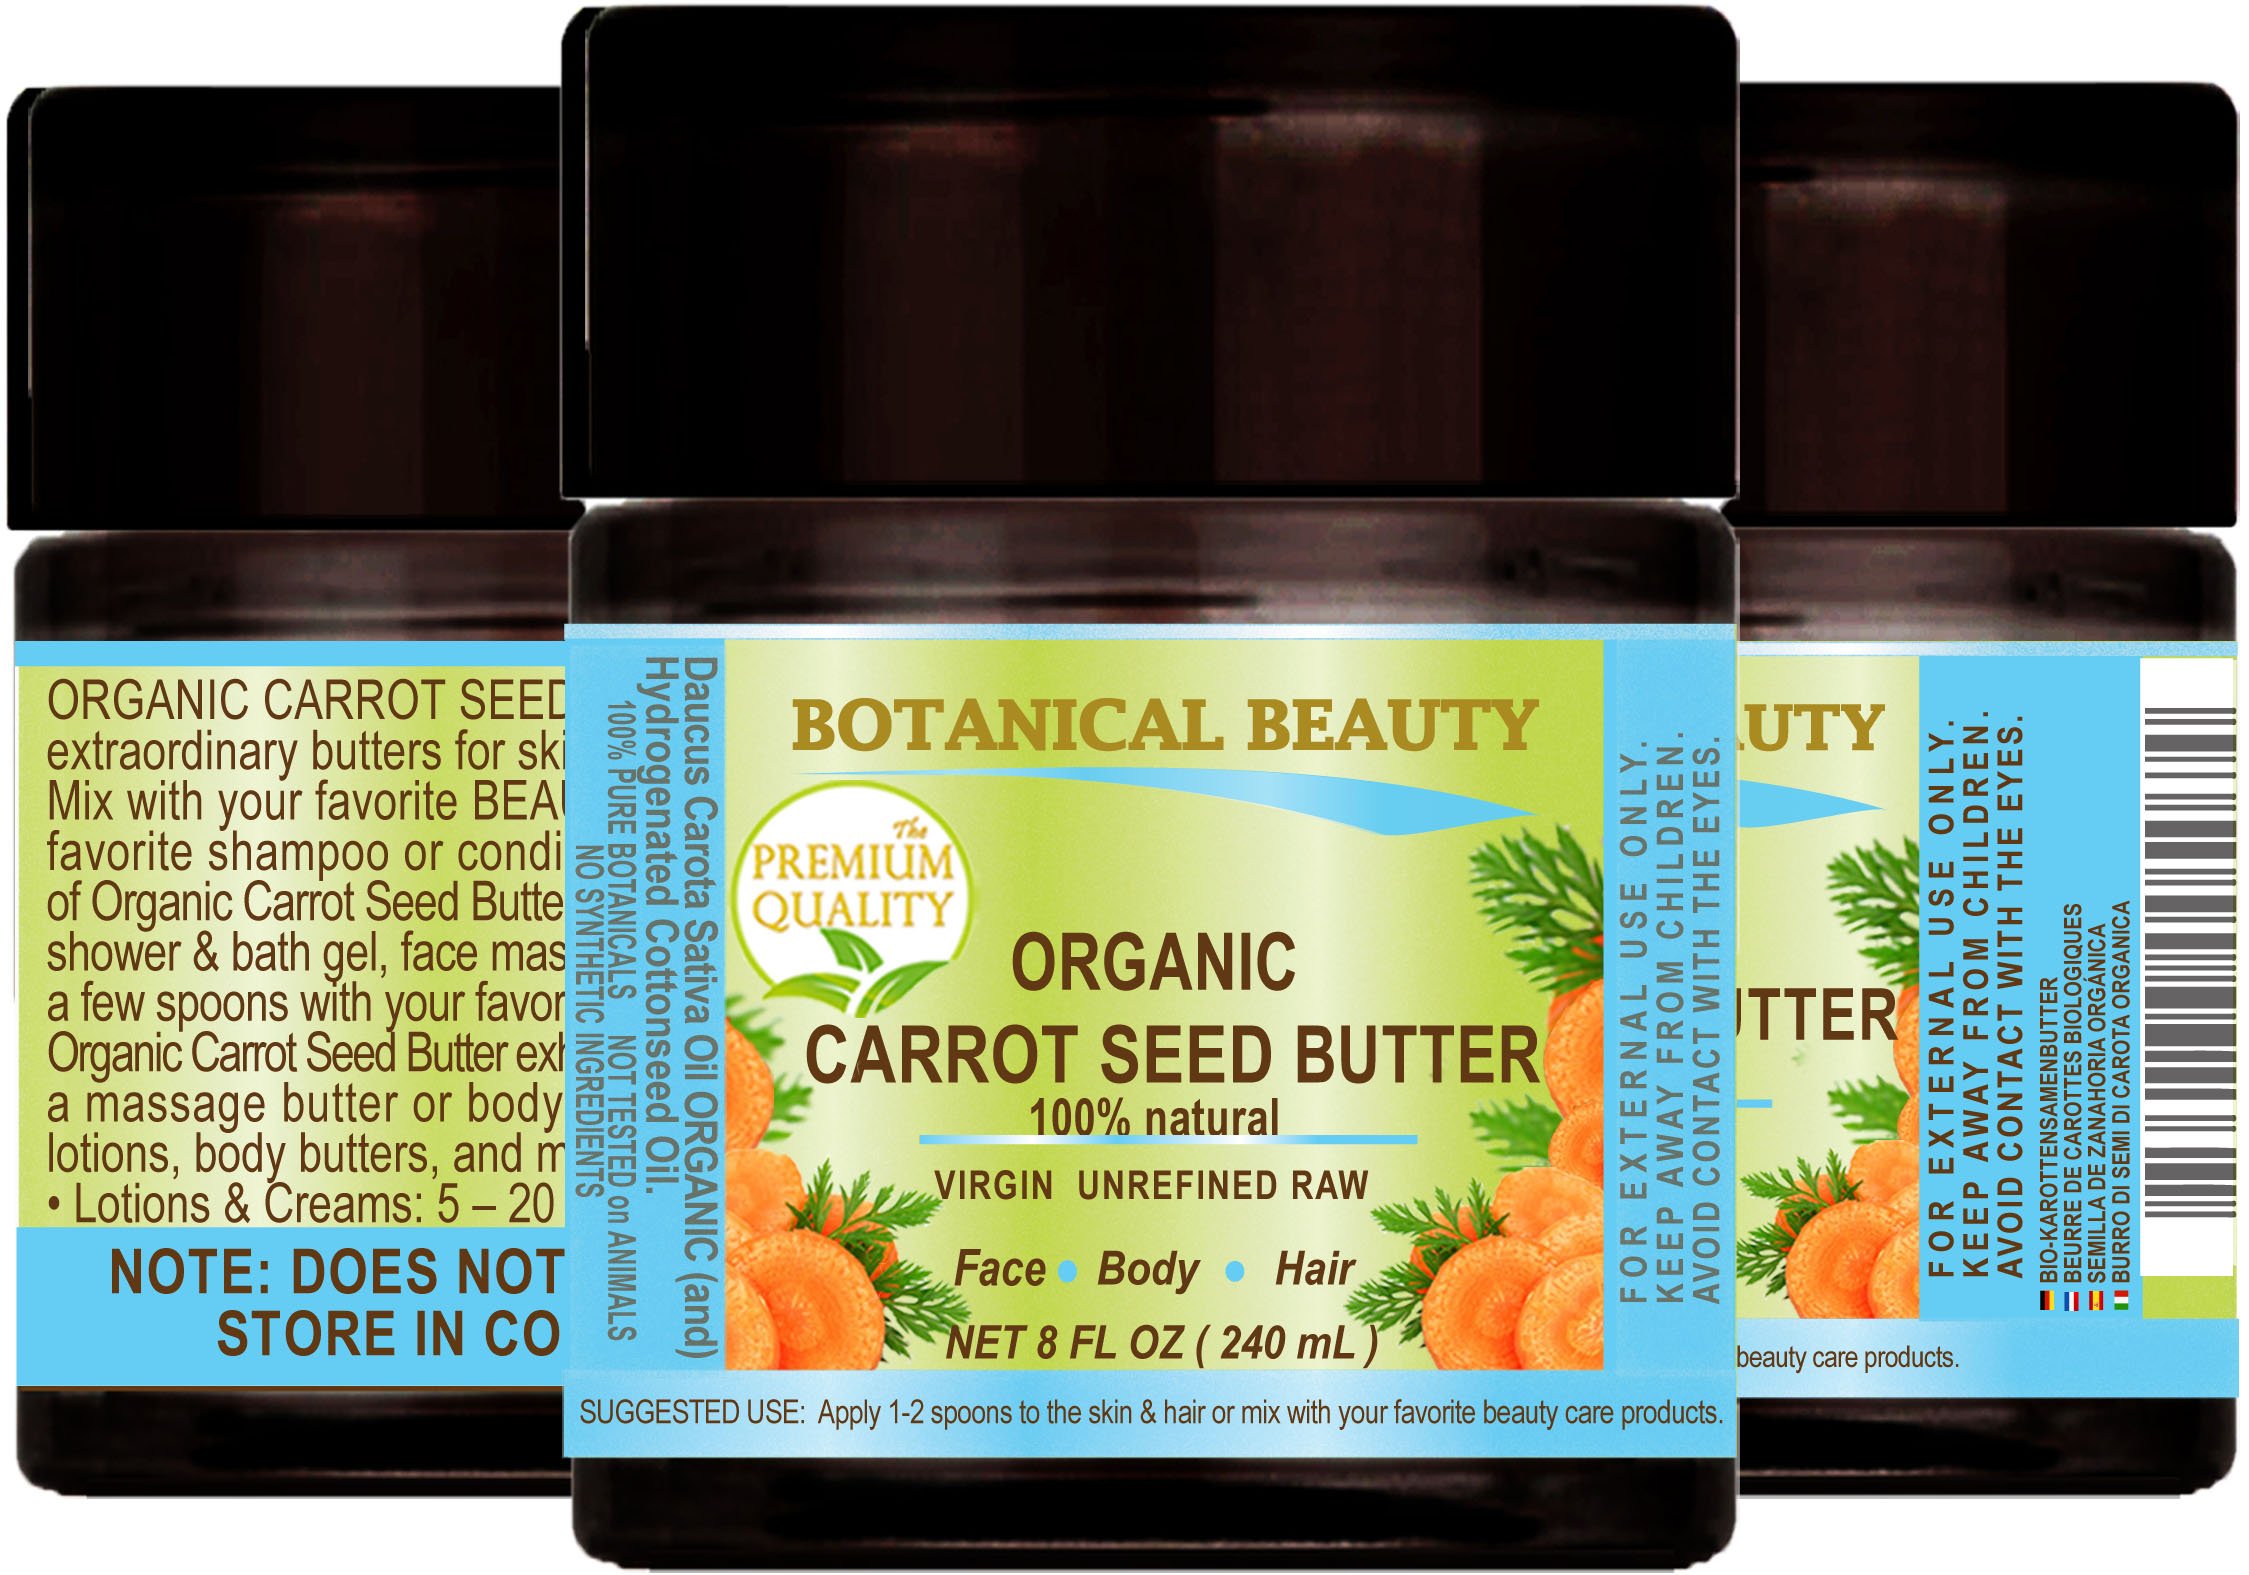 Botanical Beauty ORGANIC CARROT SEED OIL BUTTER RAW. 100% Natural/VIRGIN/UNREFINED. 8 Fl oz - 240 ml. For Skin, Hair, Lip and Nail Care.